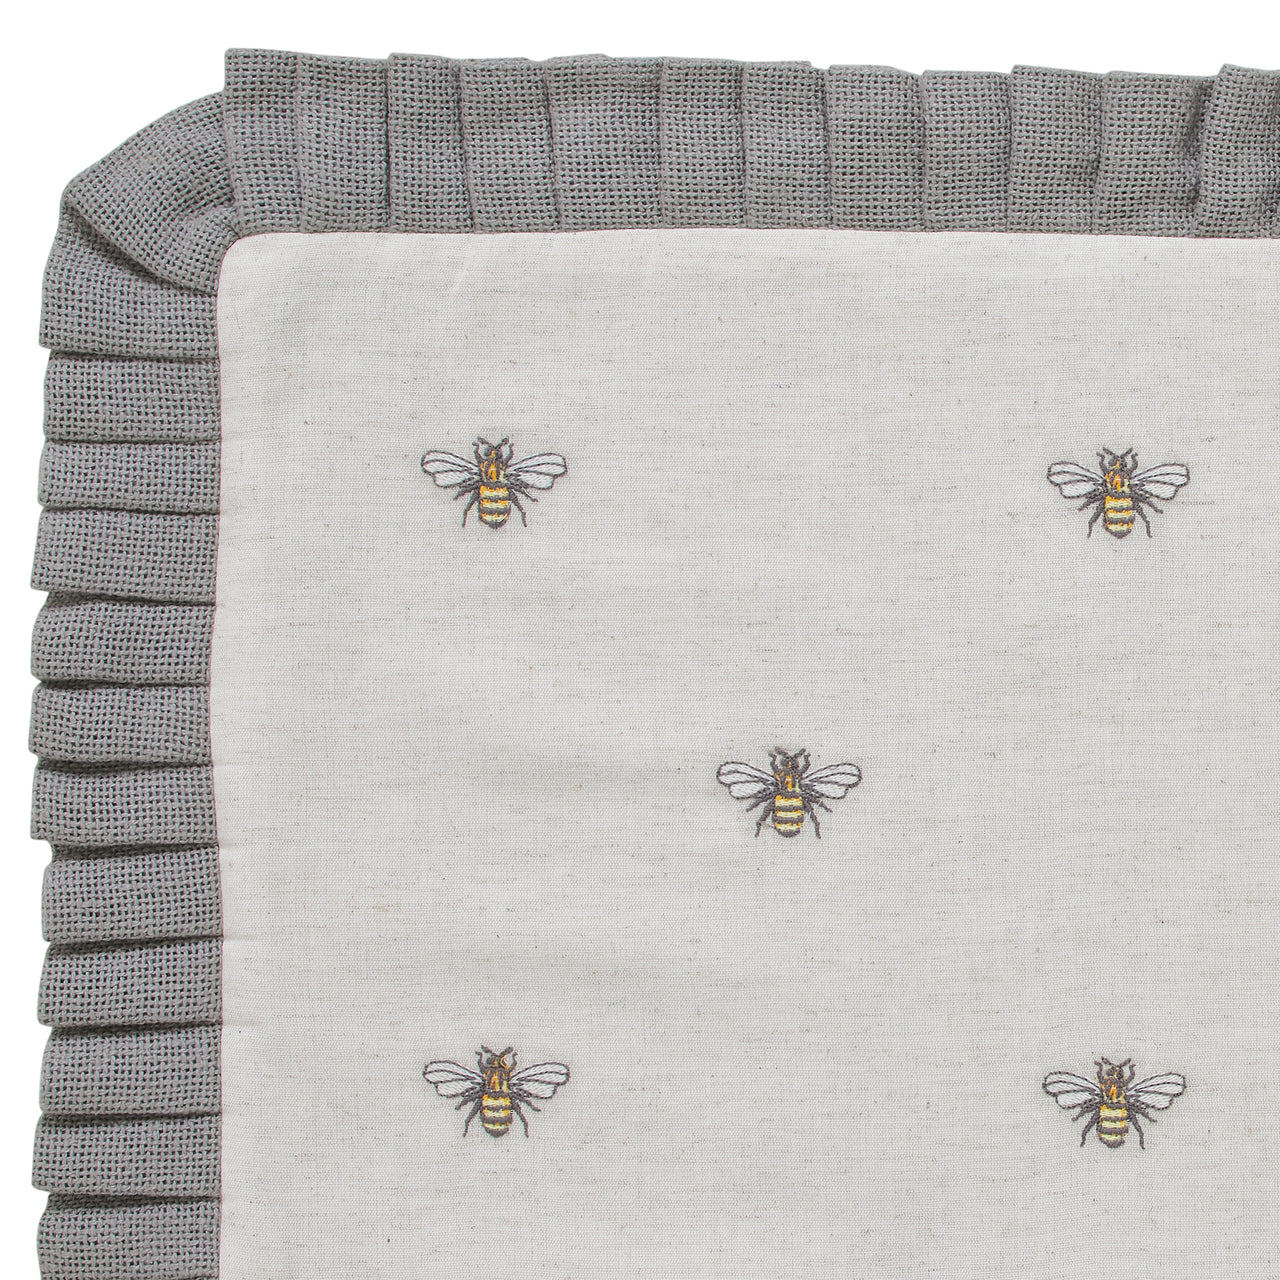 Embroidered Bee Pillow 14x22 VHC Brands